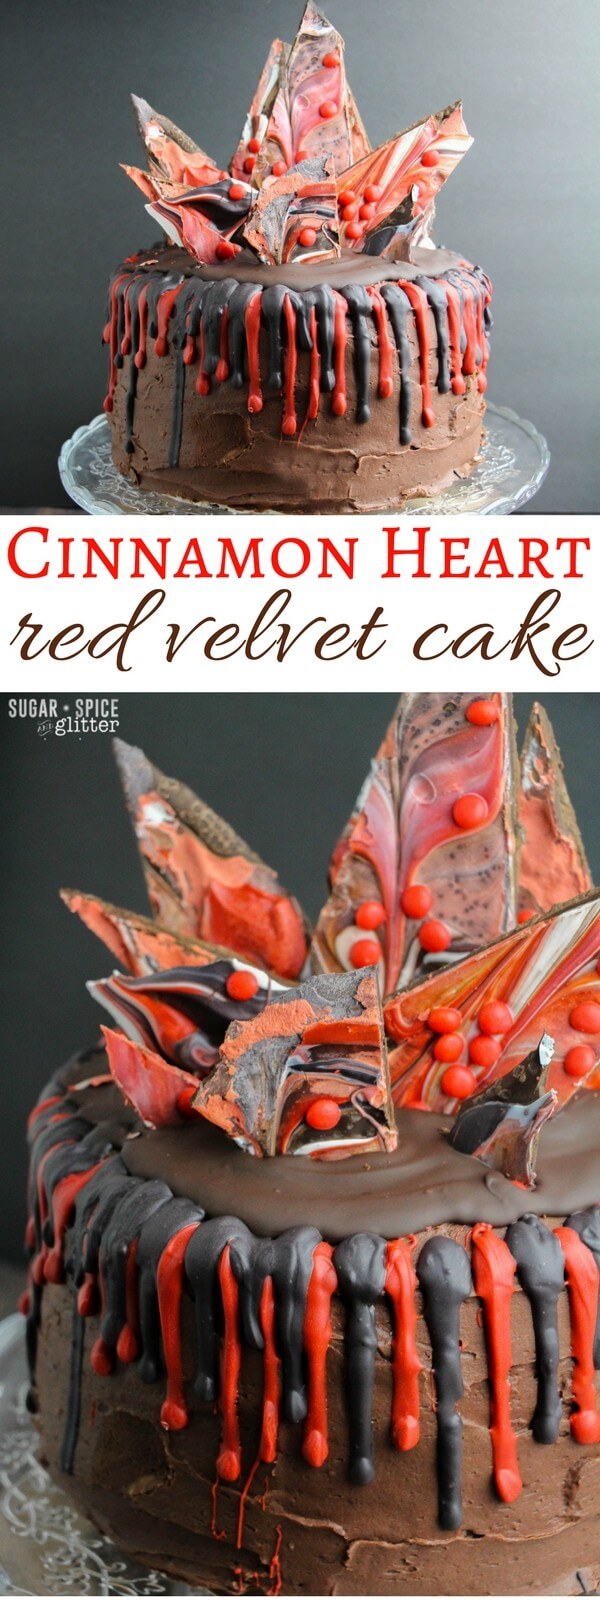 Decadent and show-stopping cinnamon heart red velvet cake - perfect anytime but especially Valentine' Day, this cake is shockingly easy to make while serving as the perfect focal point for your Valentine's day spread